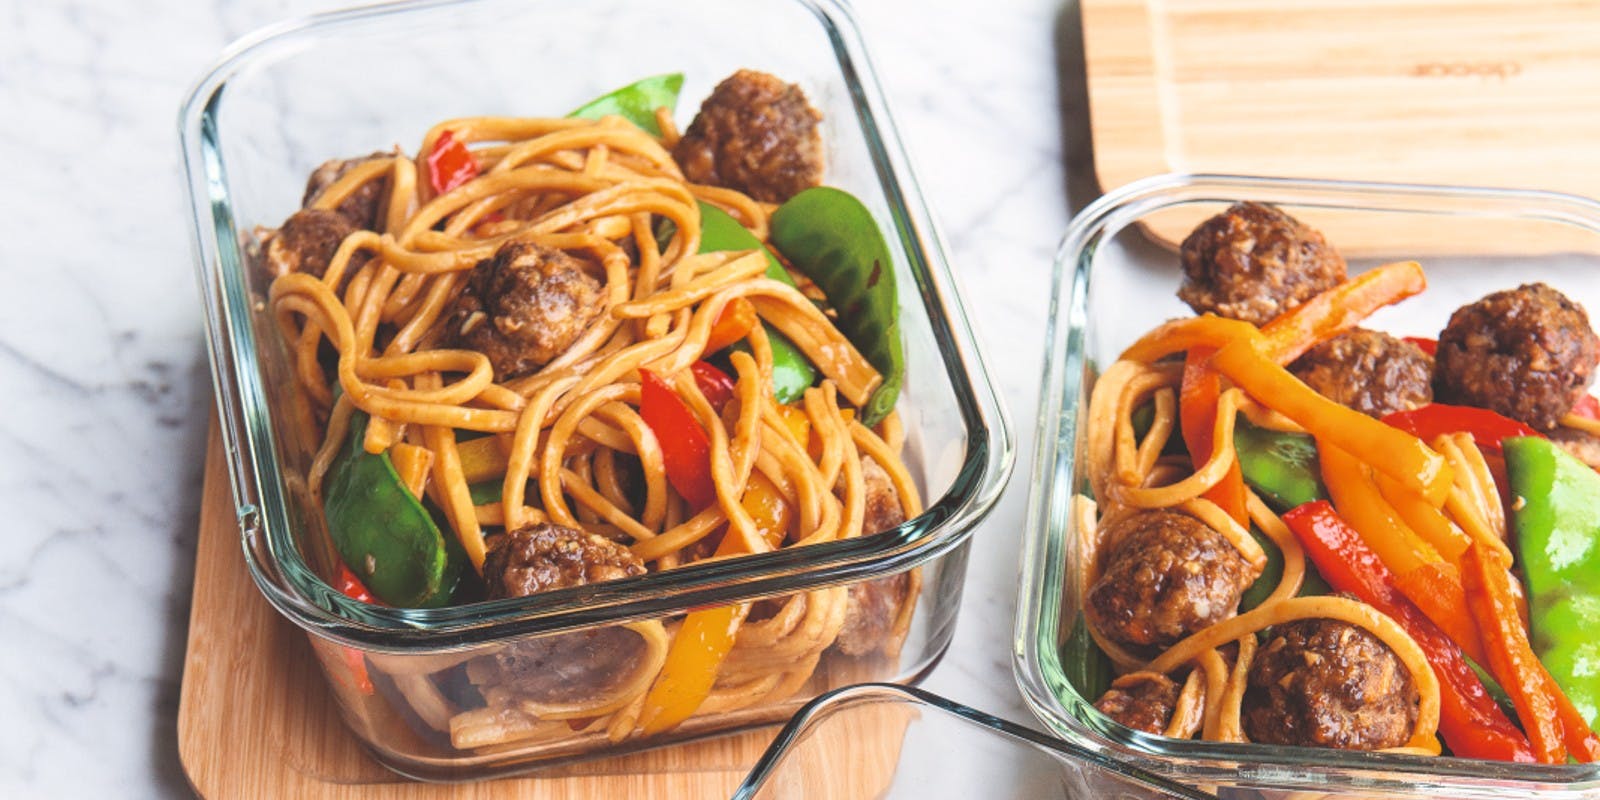 Tray-Bake Ginger Beef Meatballs with Vegetables